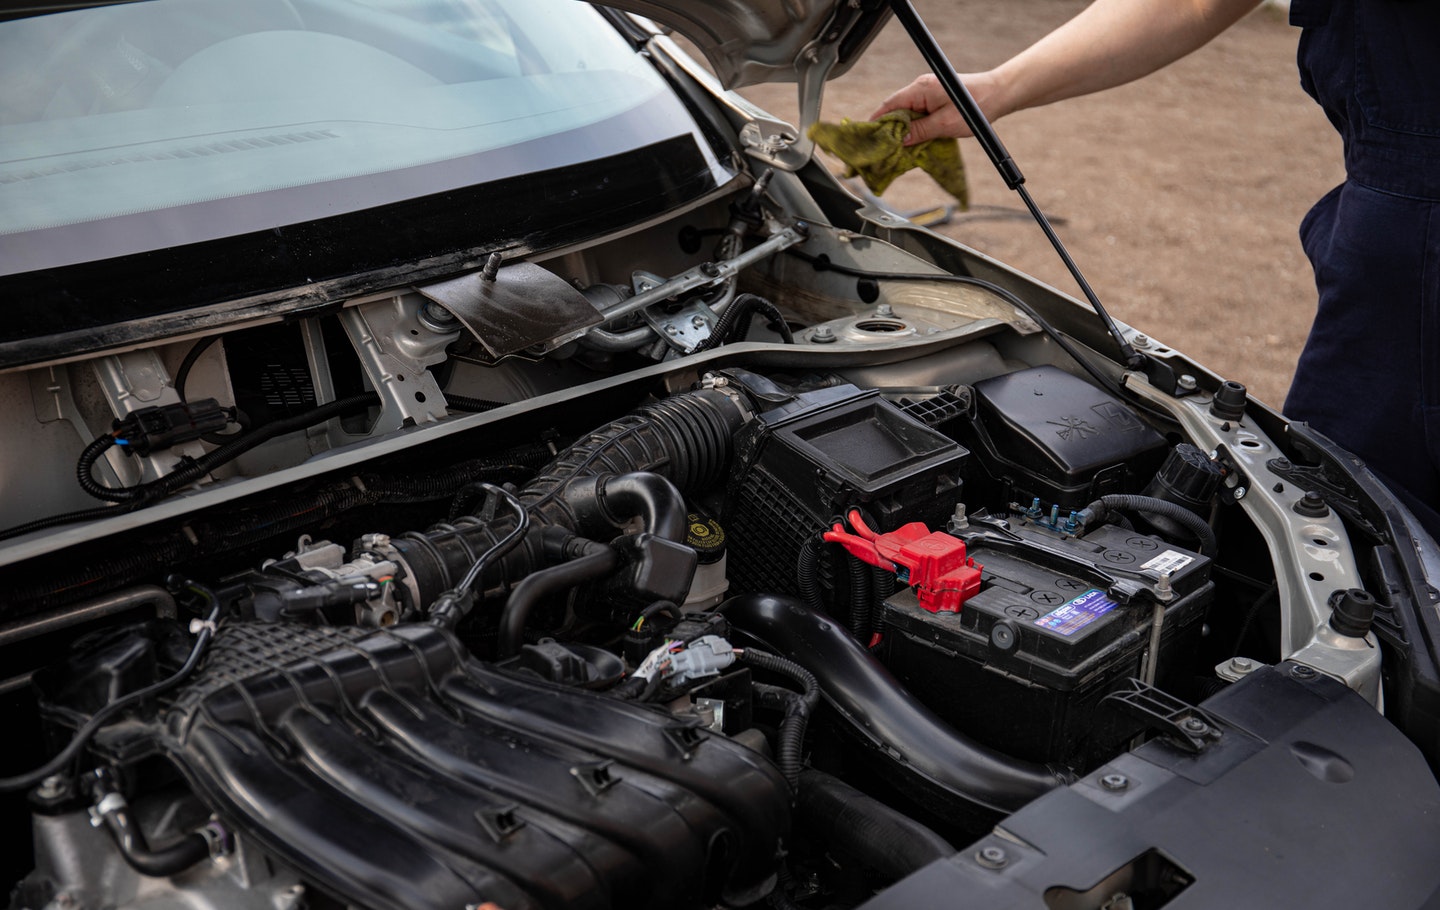 Five common signs that show your battery needs to be replaced